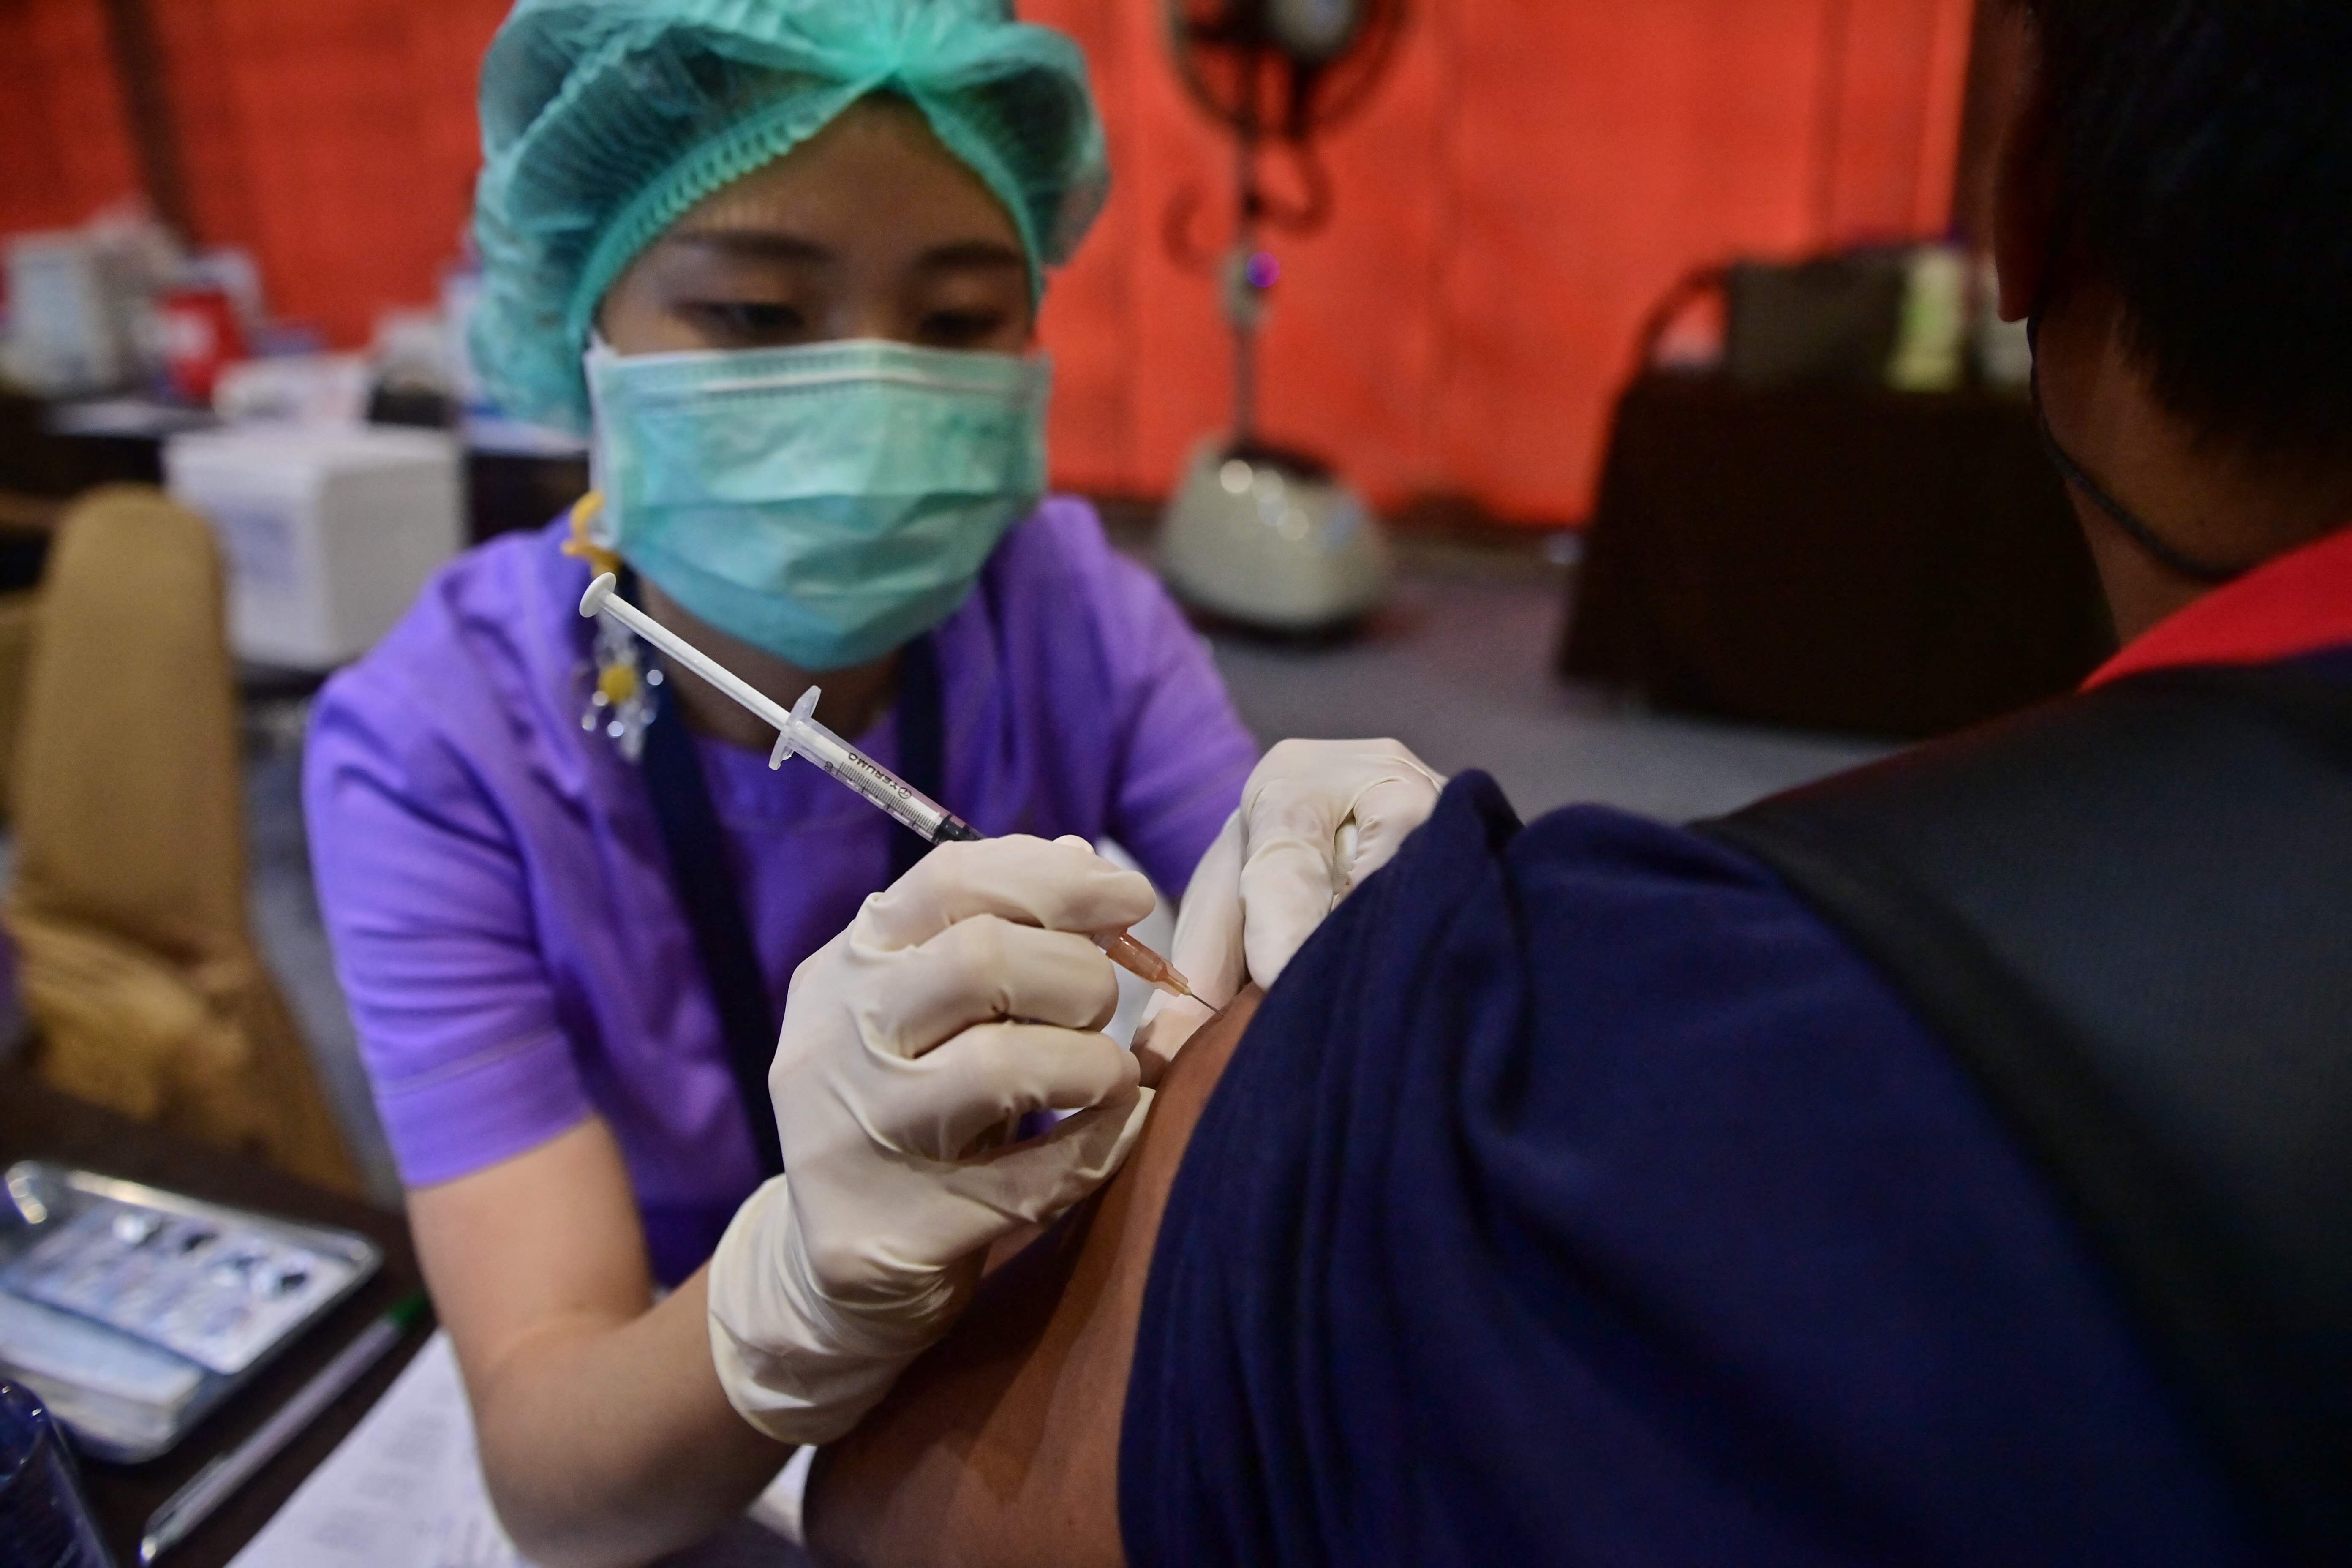 A health care worker administers a coronavirus vaccine in Bangkok. Photo: AFP